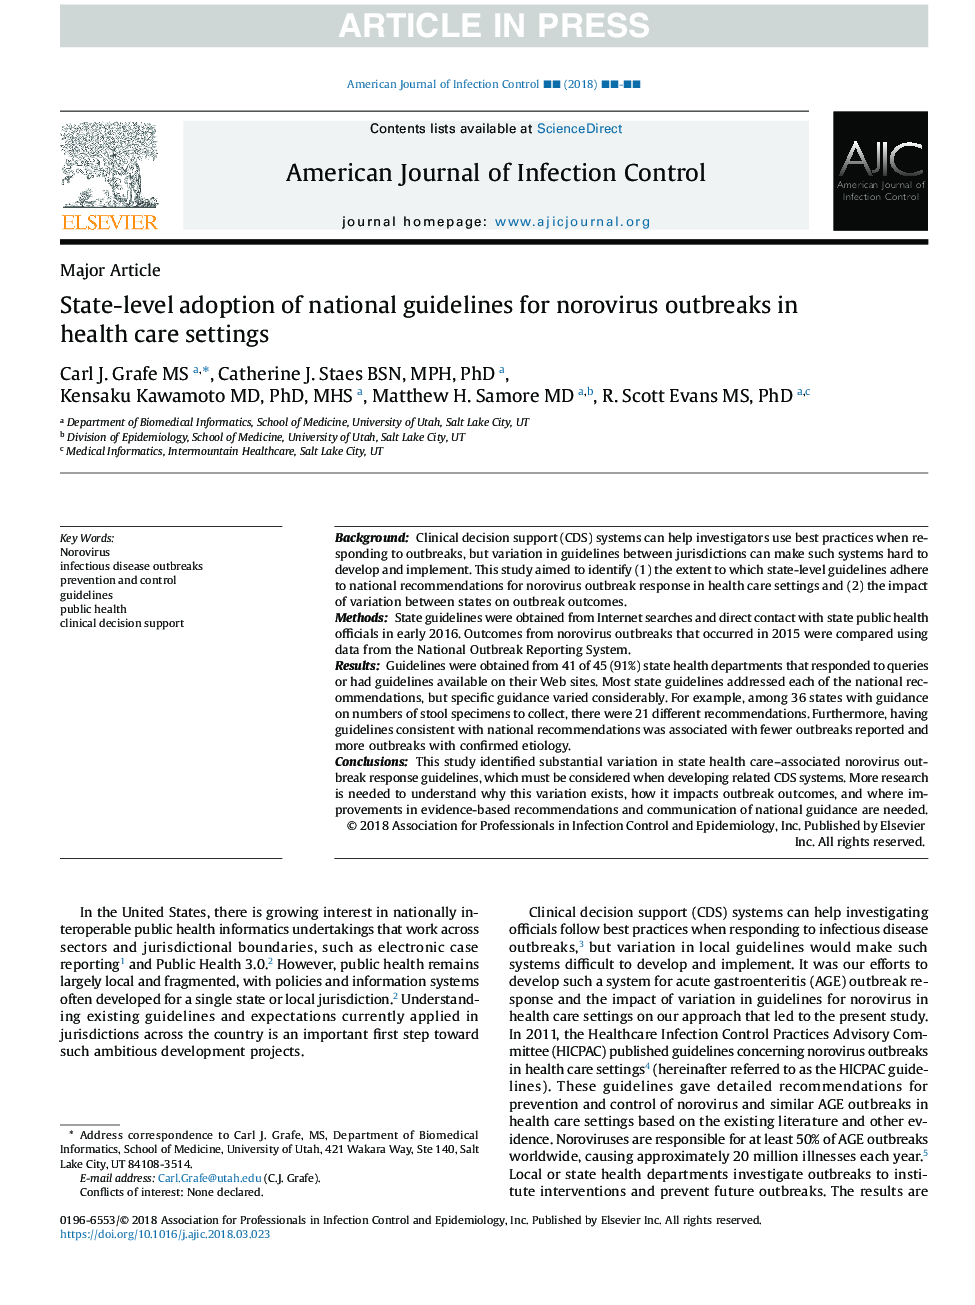 State-level adoption of national guidelines for norovirus outbreaks in health care settings